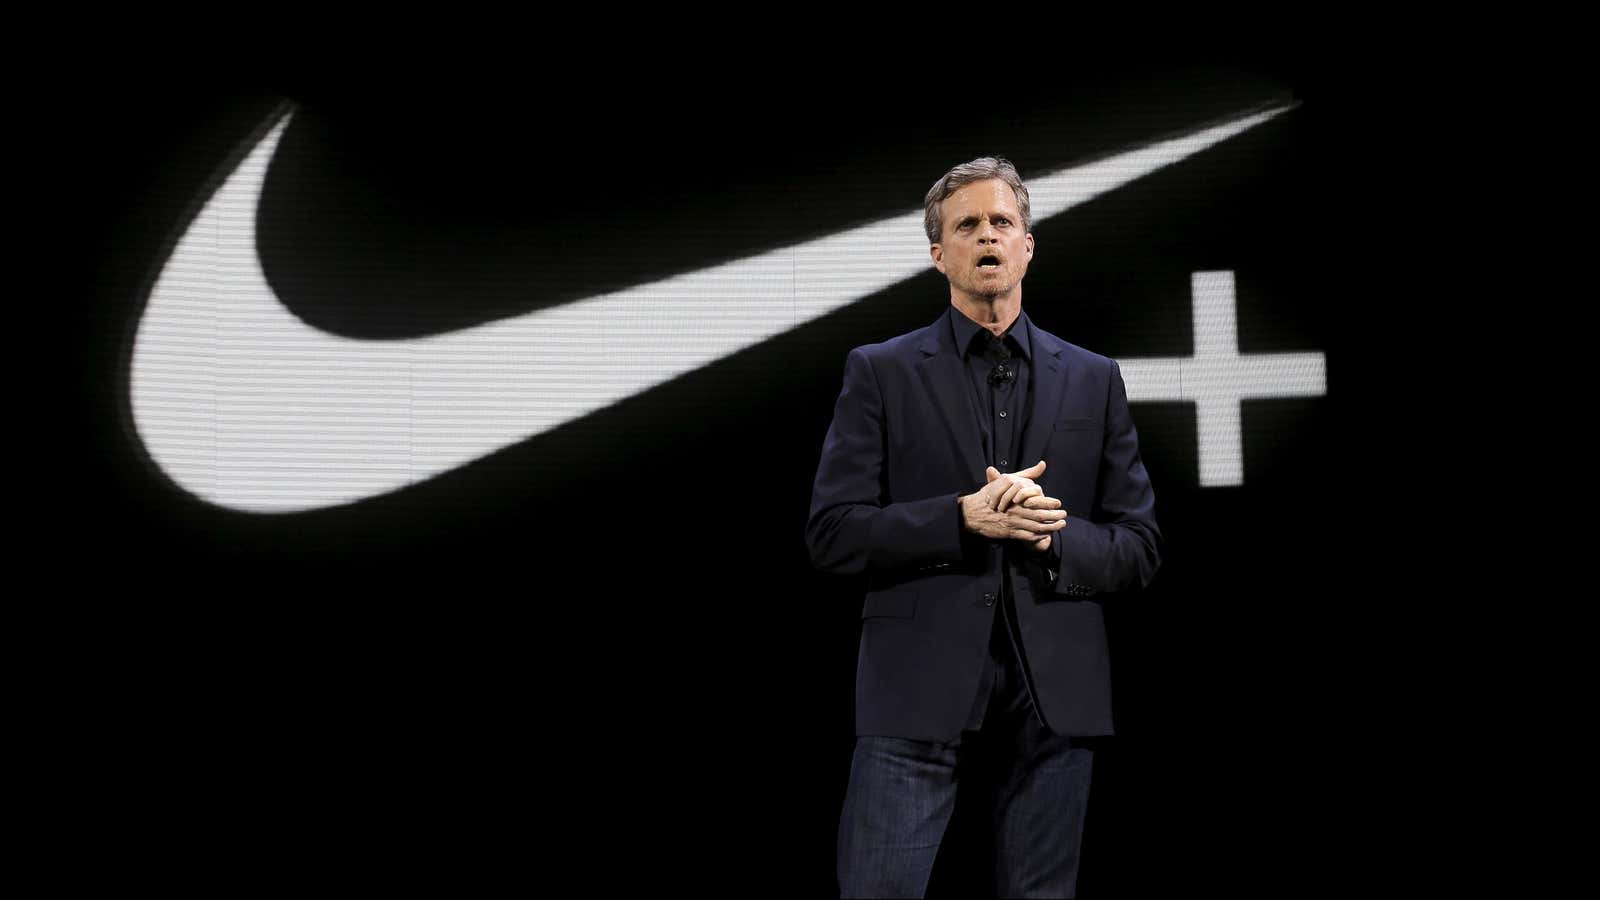 Nike’s soon-to-be former CEO, Mark Parker.